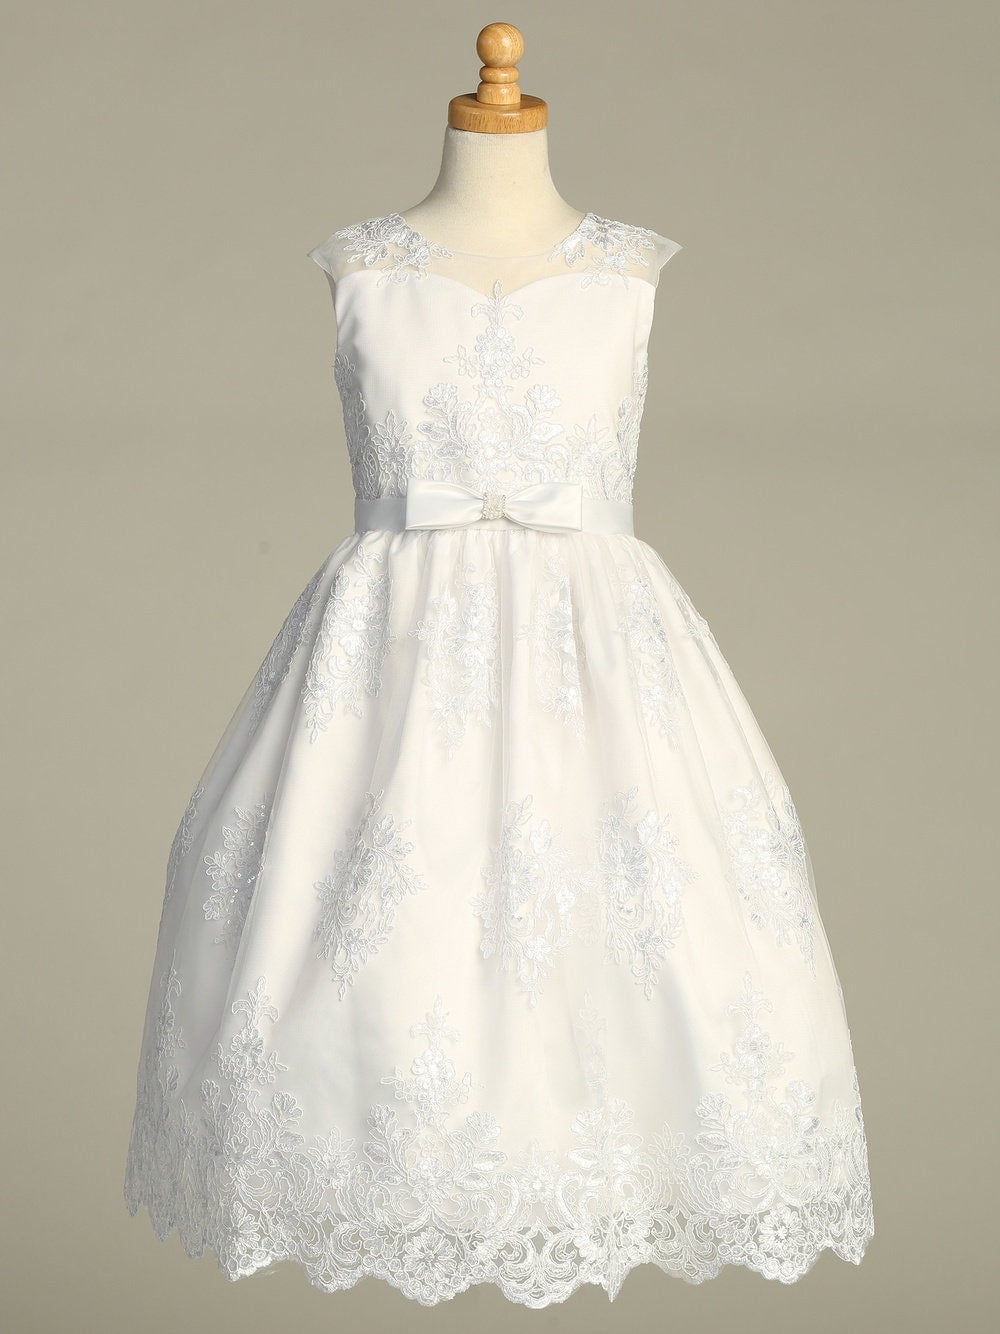 A full-length view of the First Communion Dress showing the elegant silhouette and corded embroidered tulle with sequins.